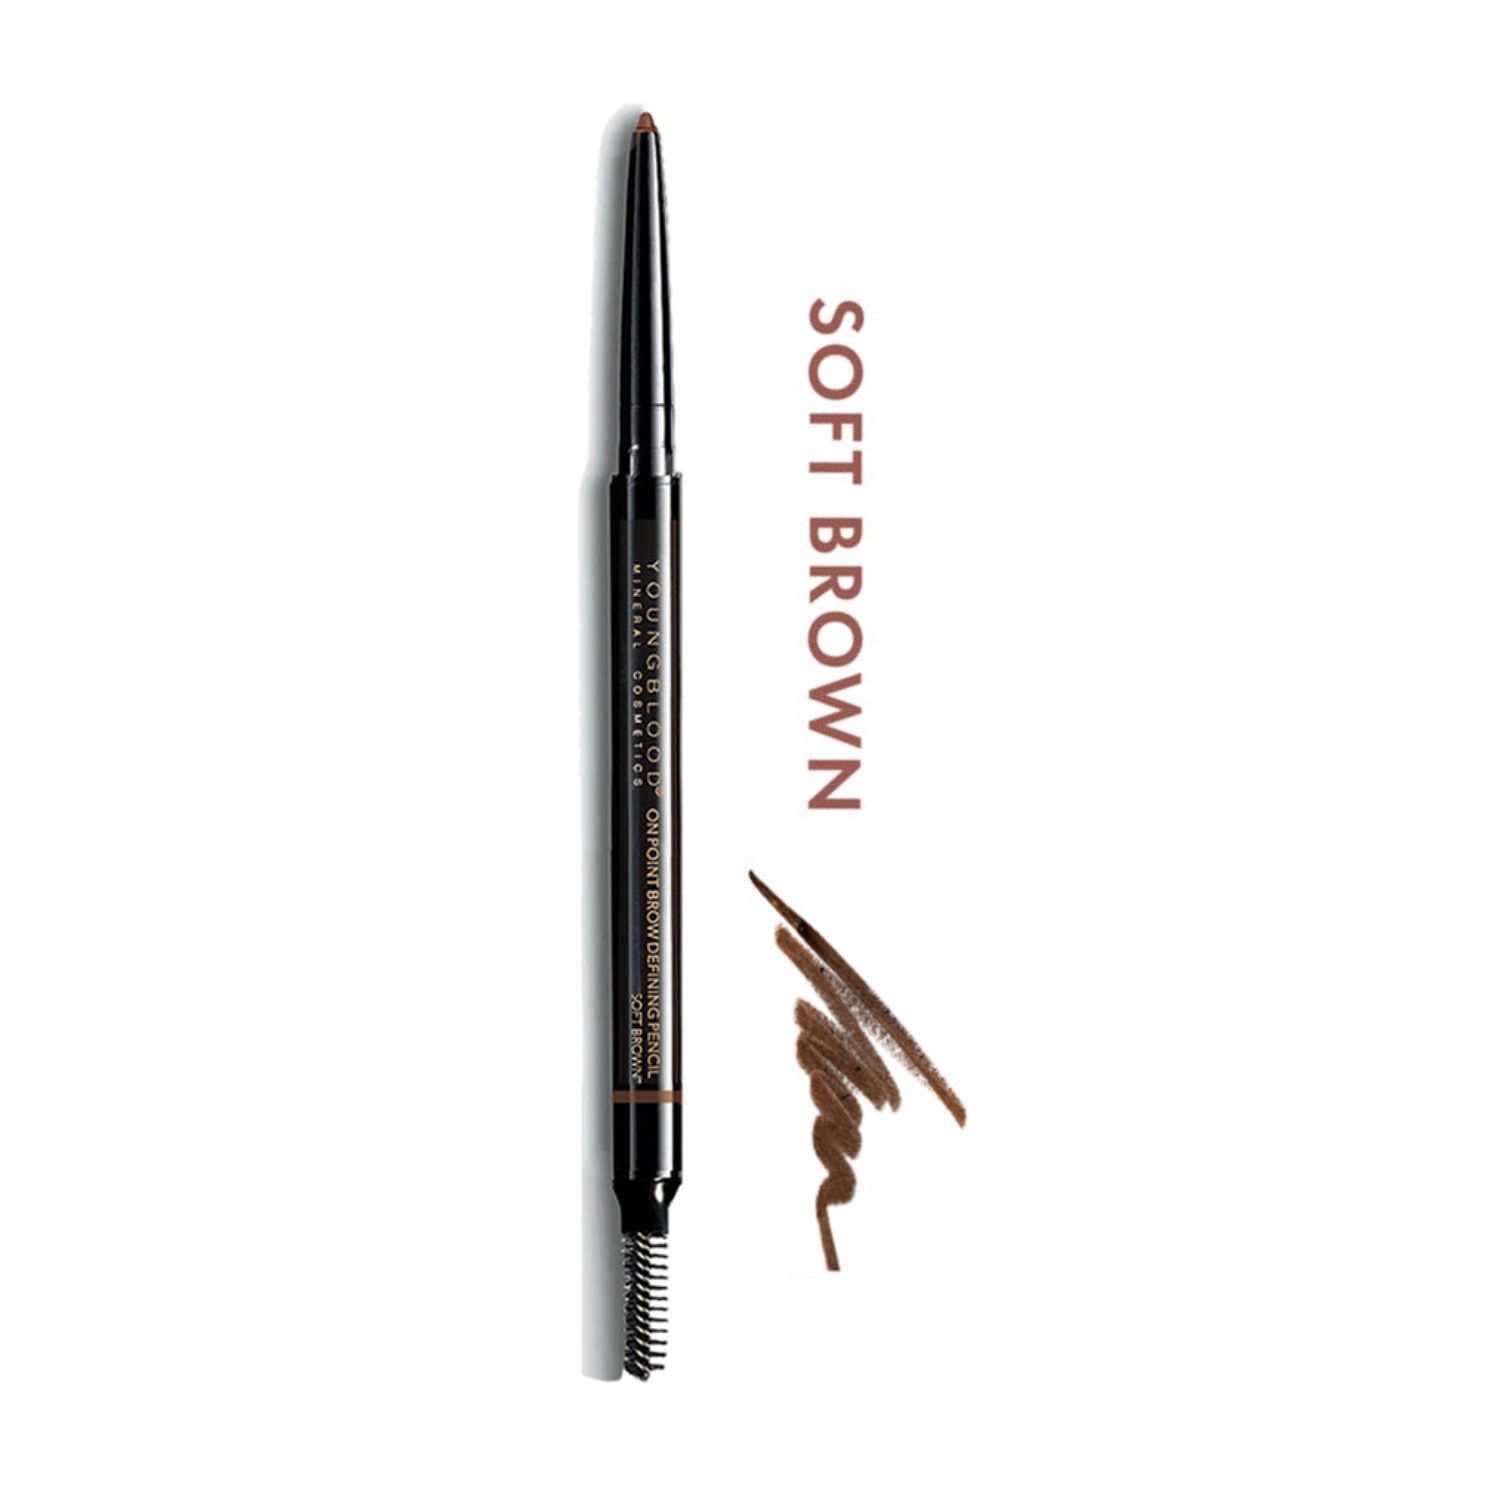 Youngblood On Point Brow Defining Pencil 0.35g - Soft Brown